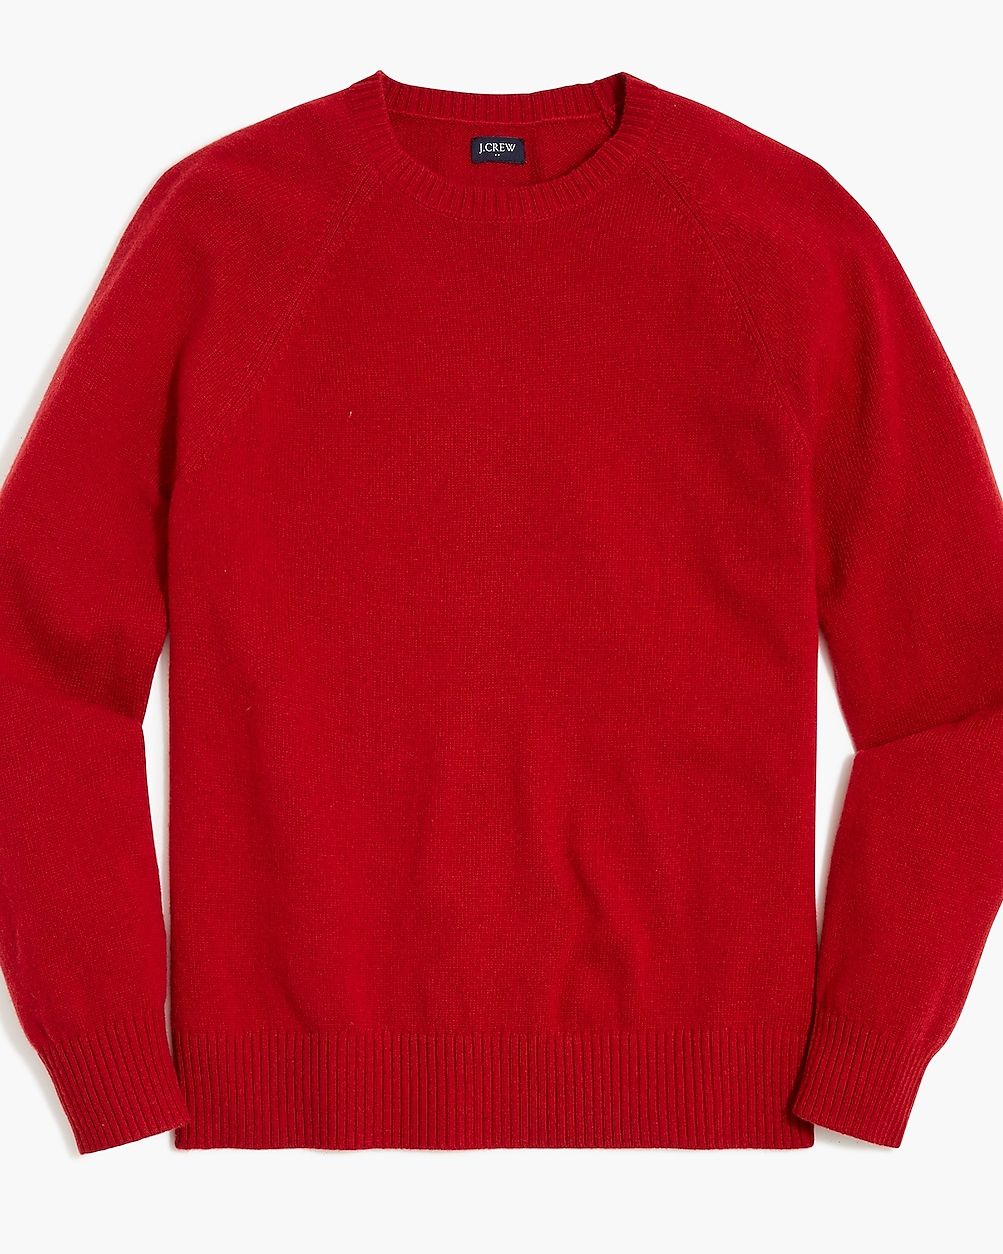 Crewneck sweater in supersoft lambswool blend | J.Crew Factory